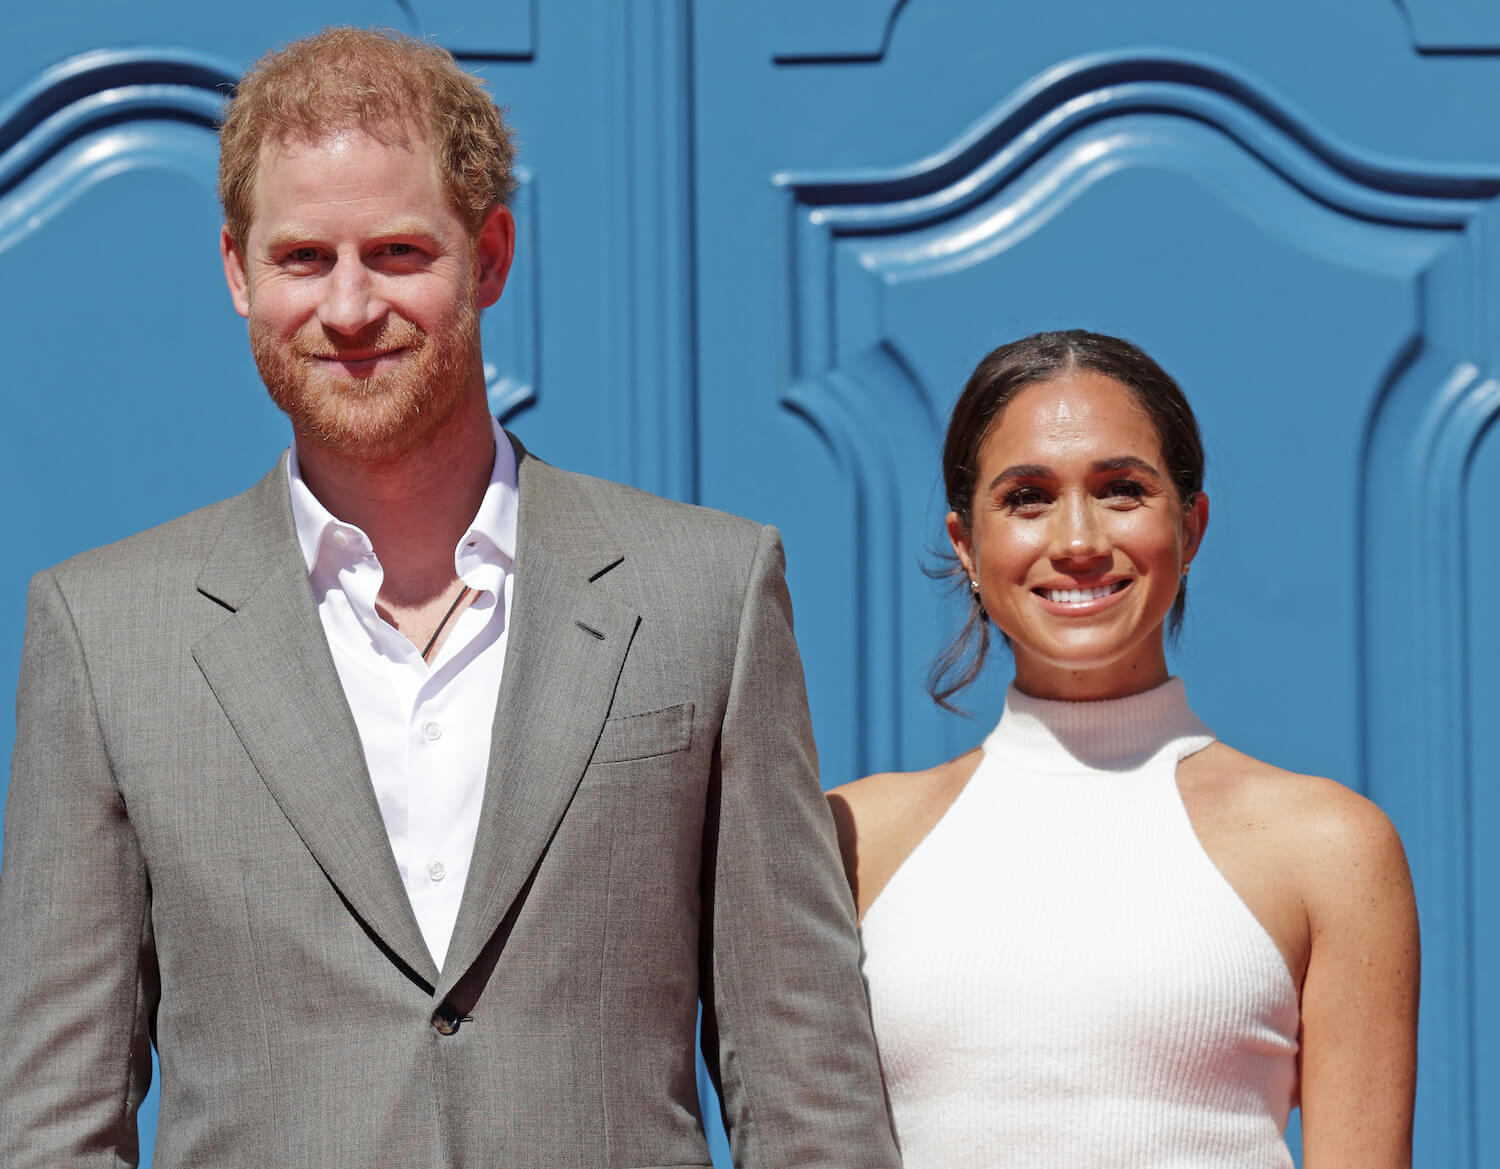 Prince Harry and Meghan Markle smile while standing in front of a blue door